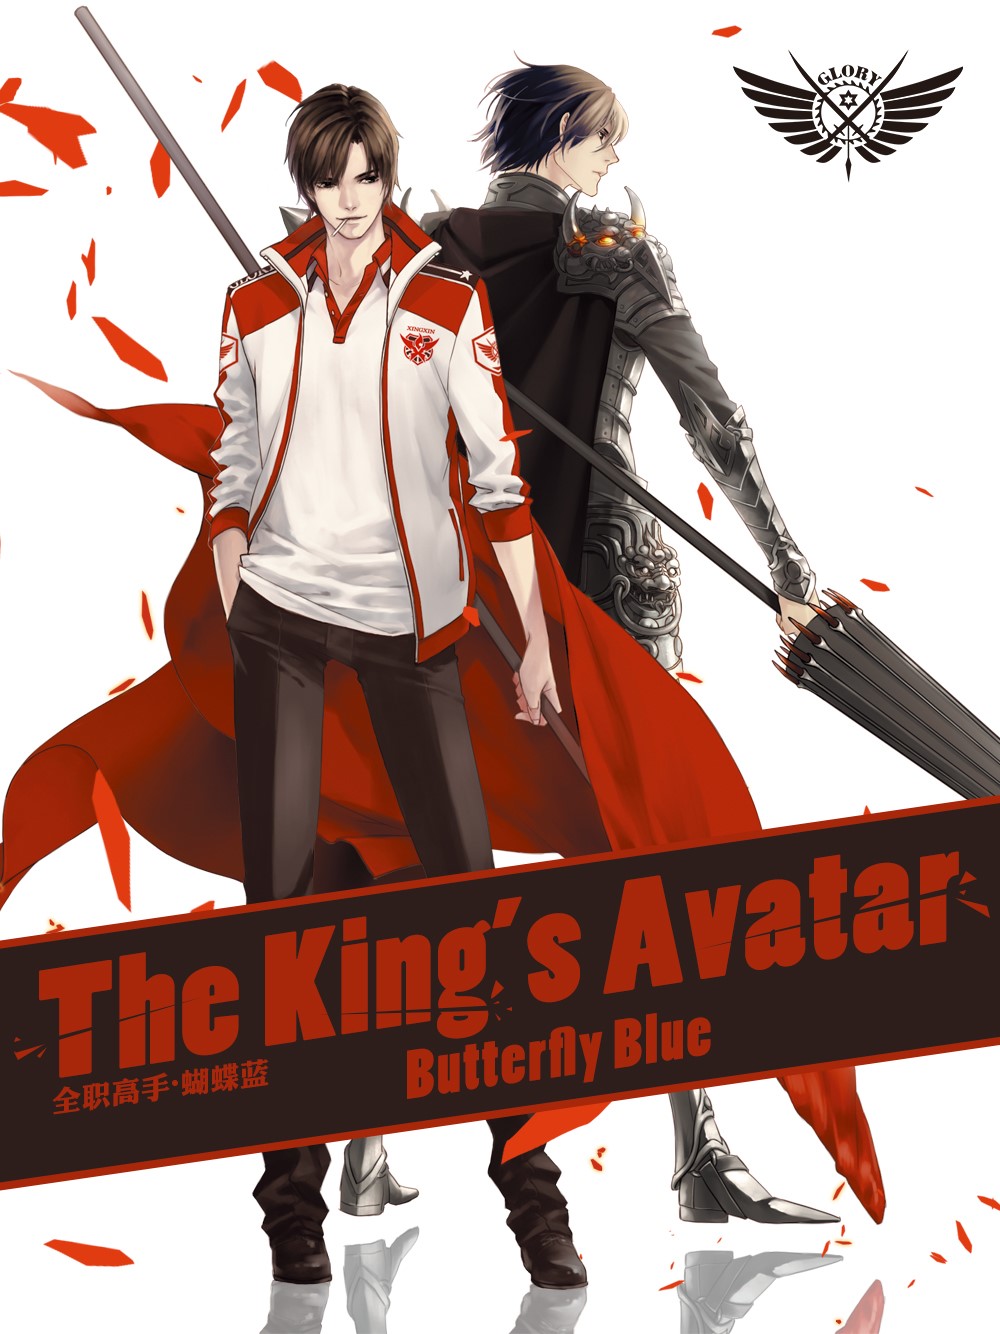 Featured image of post Anime Like Kings Avatar The king s avatar is a donghua chinese anime revolving around a multiplayer online video game called glory